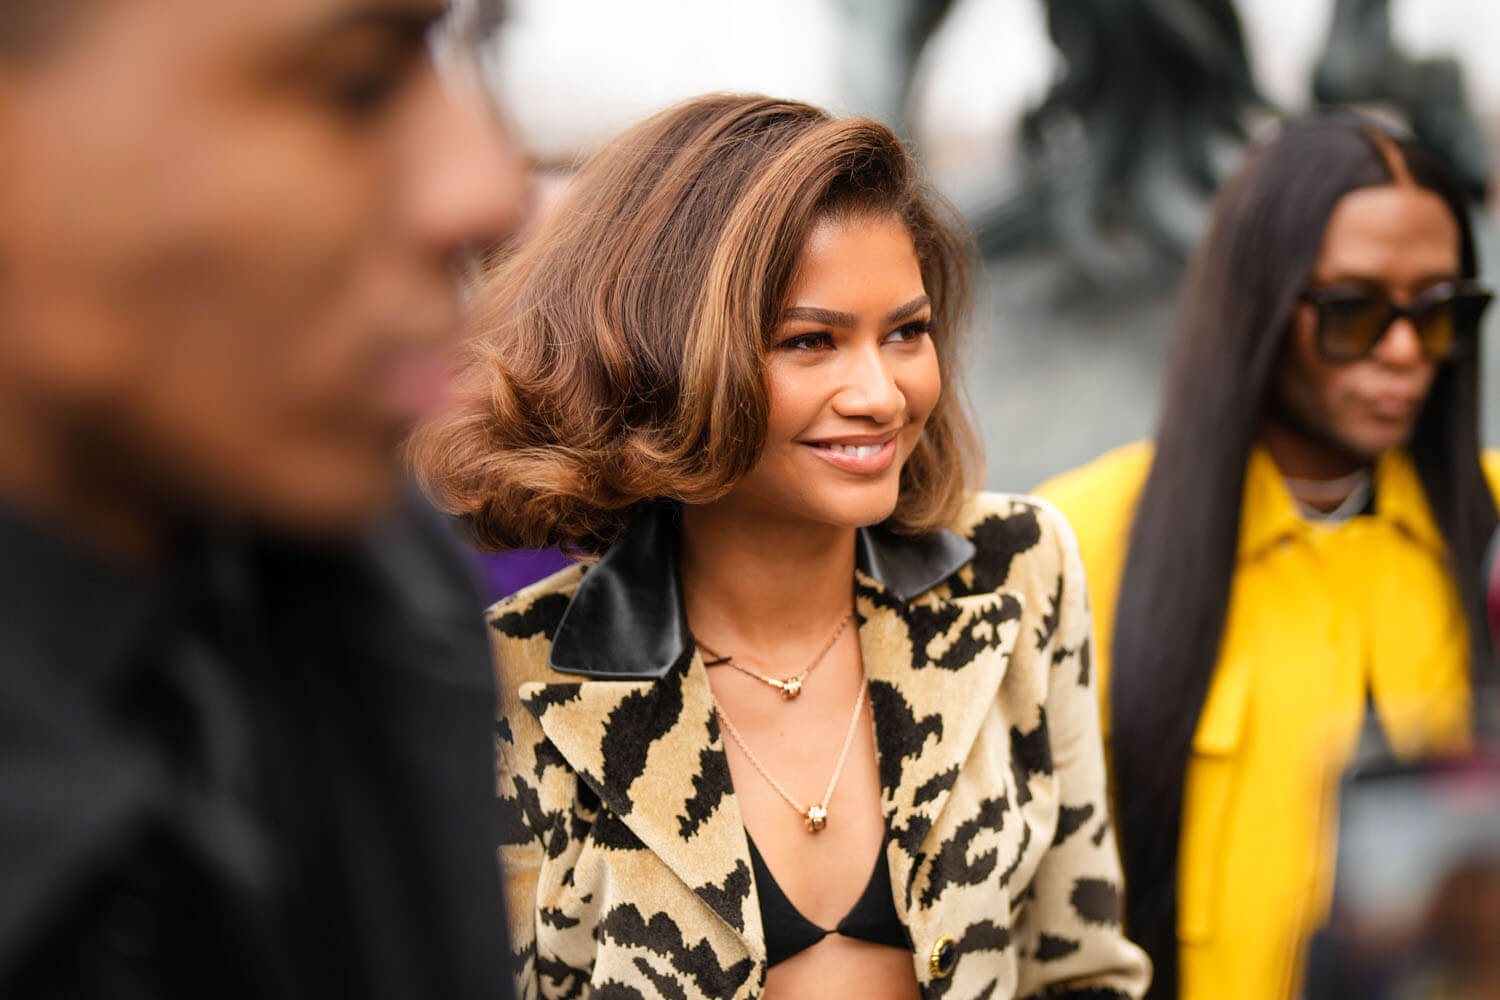 Social media is convinced that Zendaya's presence at Louis Vuitton